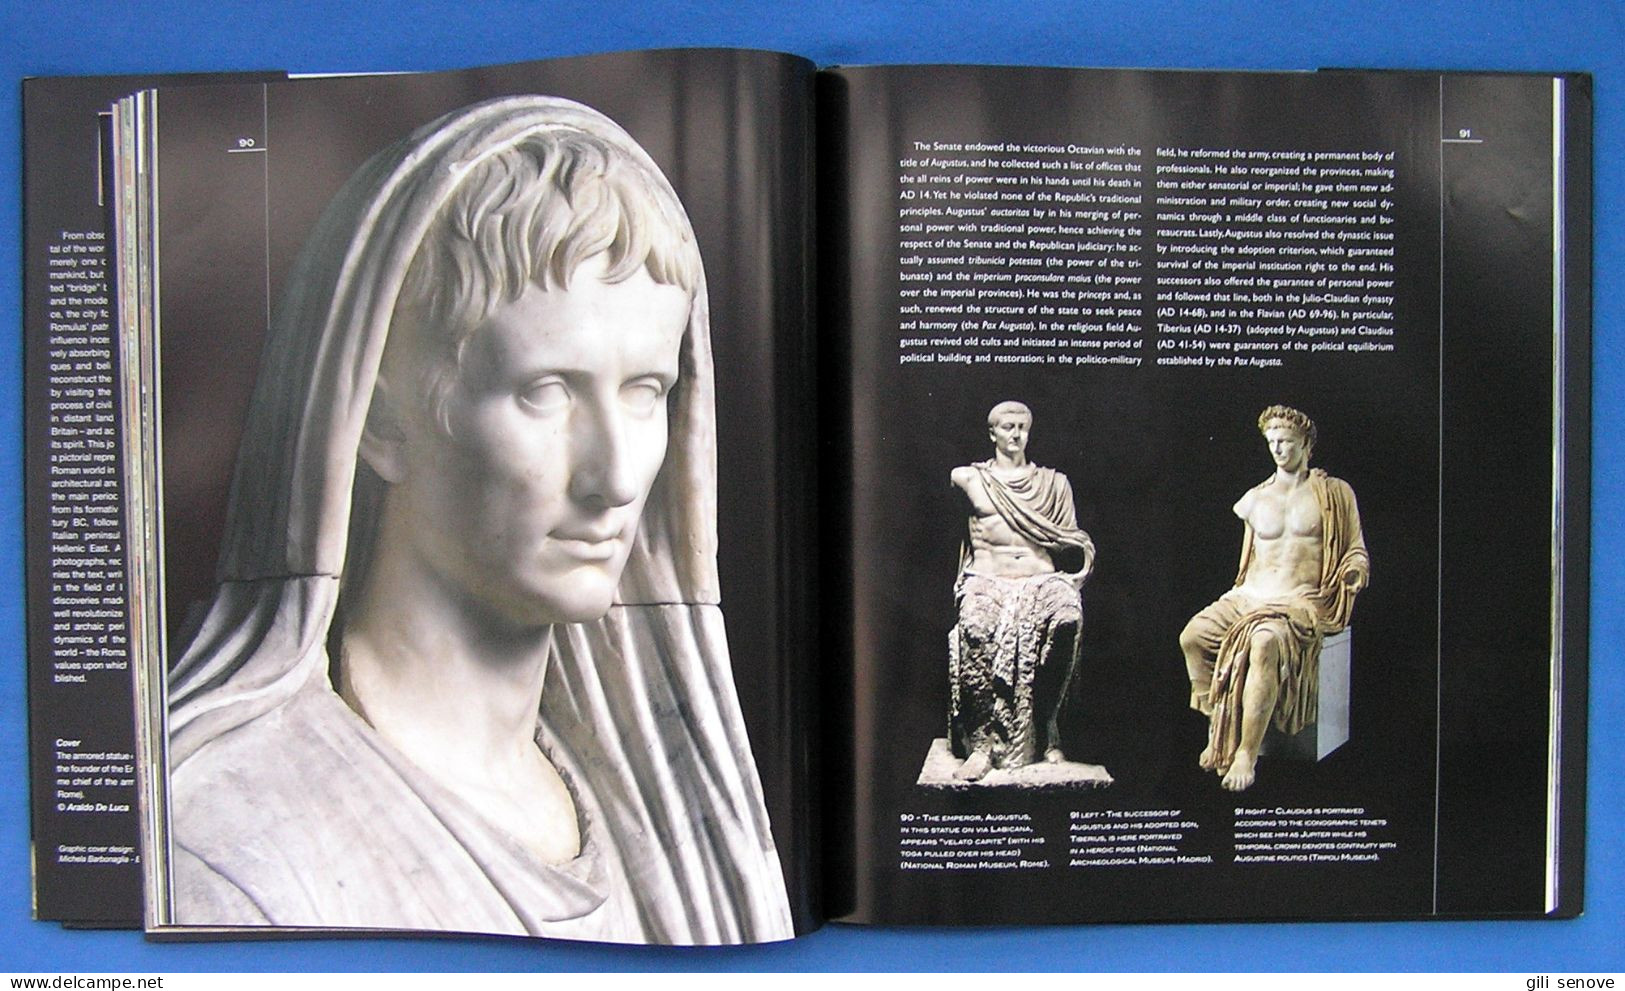 Rome: History and Treasures of an Ancient Civilization 2006